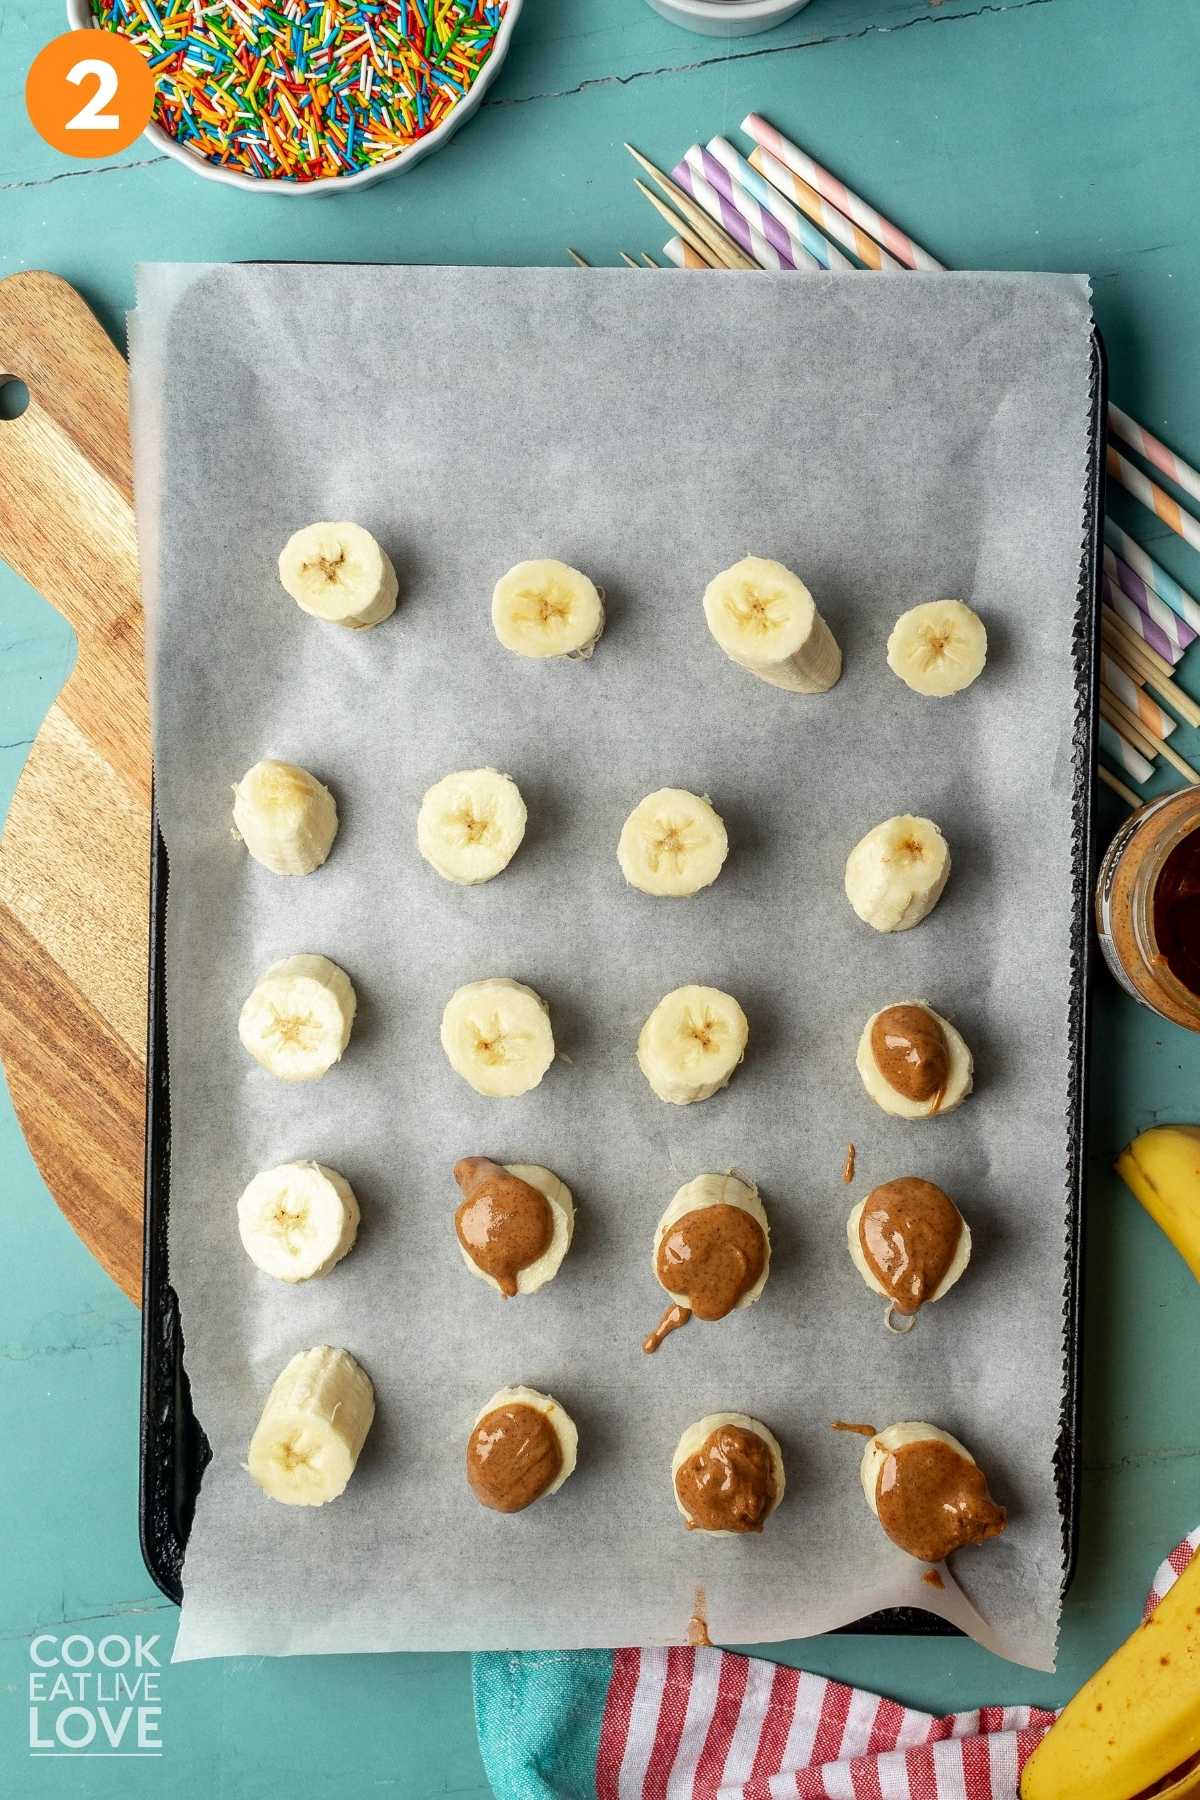 Bananas are shown cut into pieces and topped with nut butter.